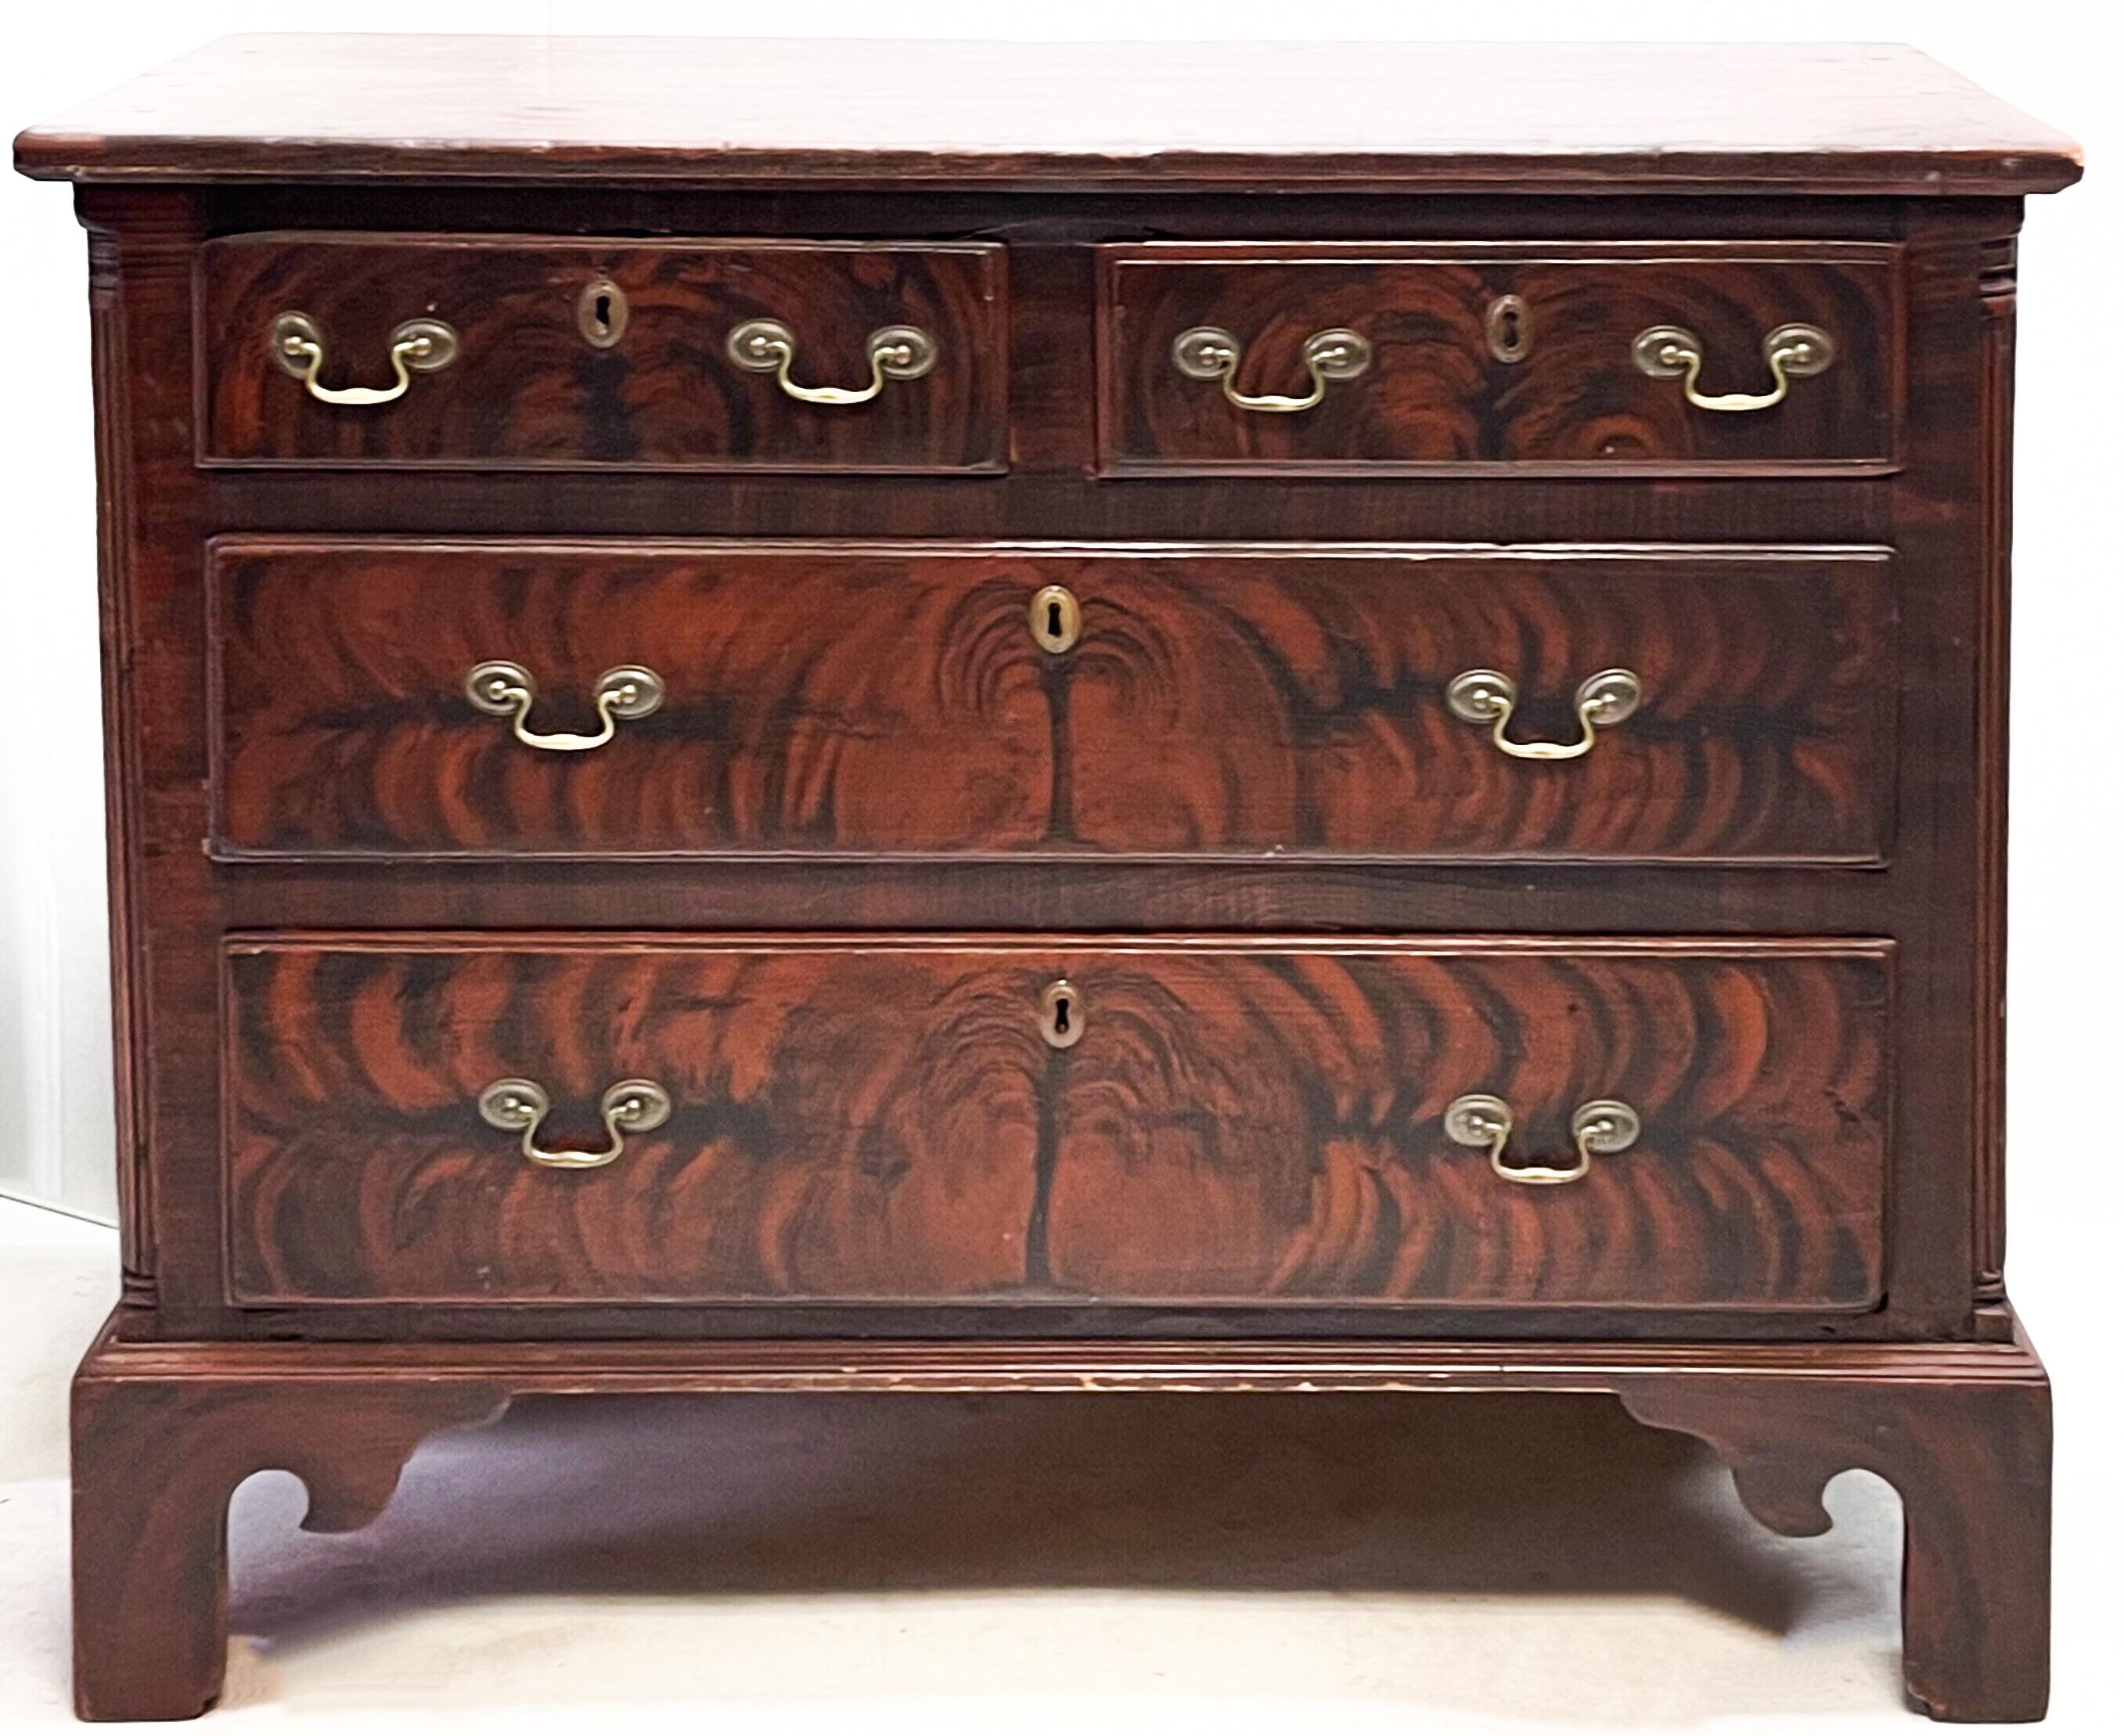 This is an amazing period piece! It is an English Georgian chest of drawers. The grain painting is magnificent. Note the sides and front! The piece appears to be in it’s original condition with peg construction and bracket feet. Versatile piece that